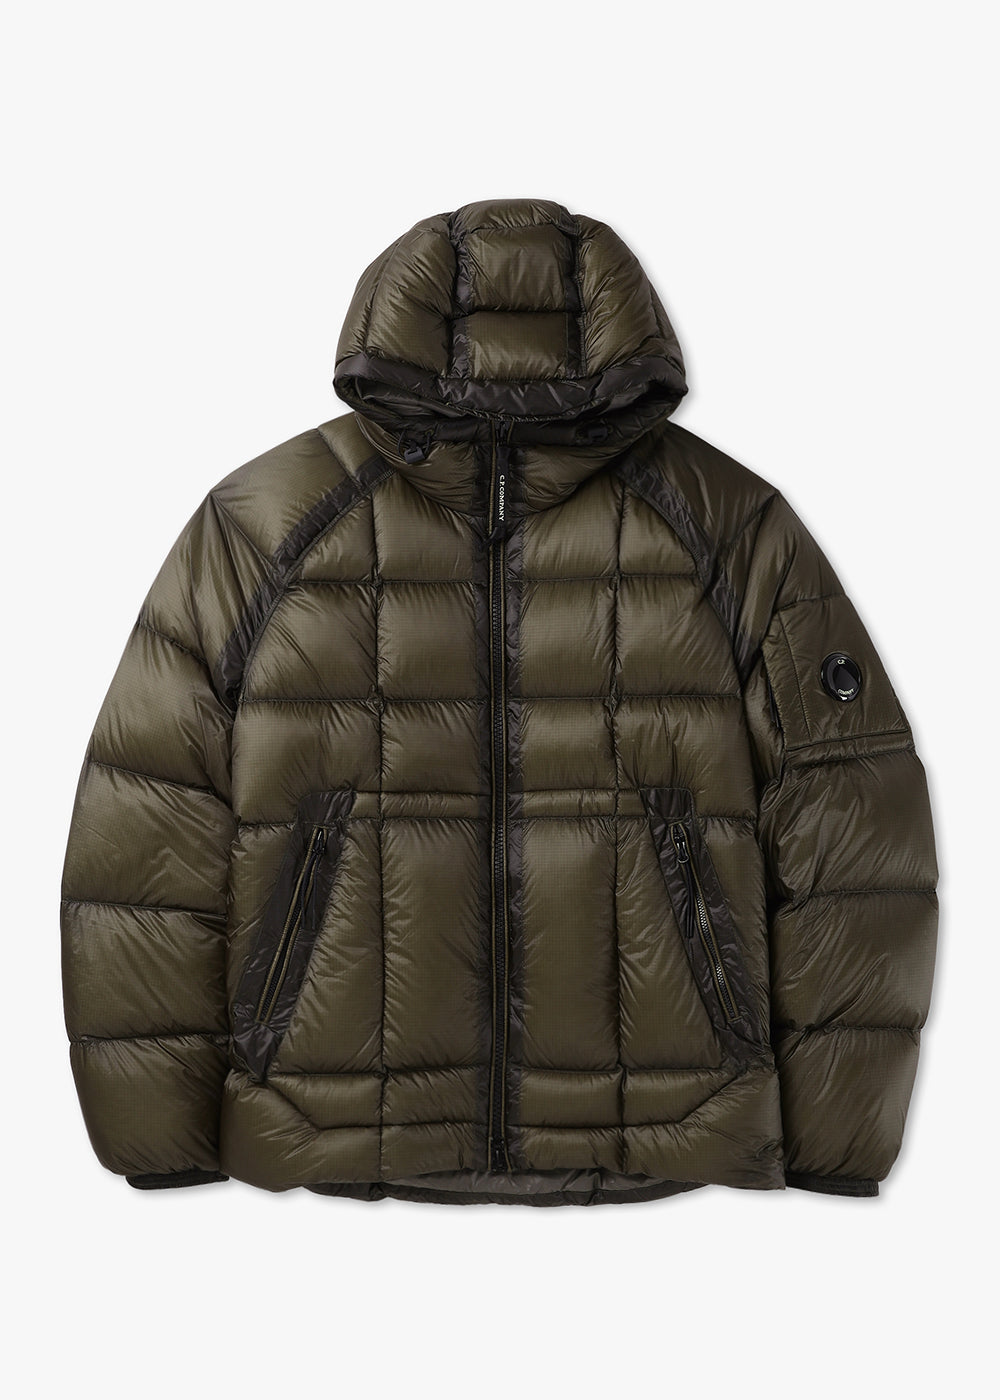 Image of C.P. Company Mens D.D.Shell Hooded Down Jacket In Olive Night